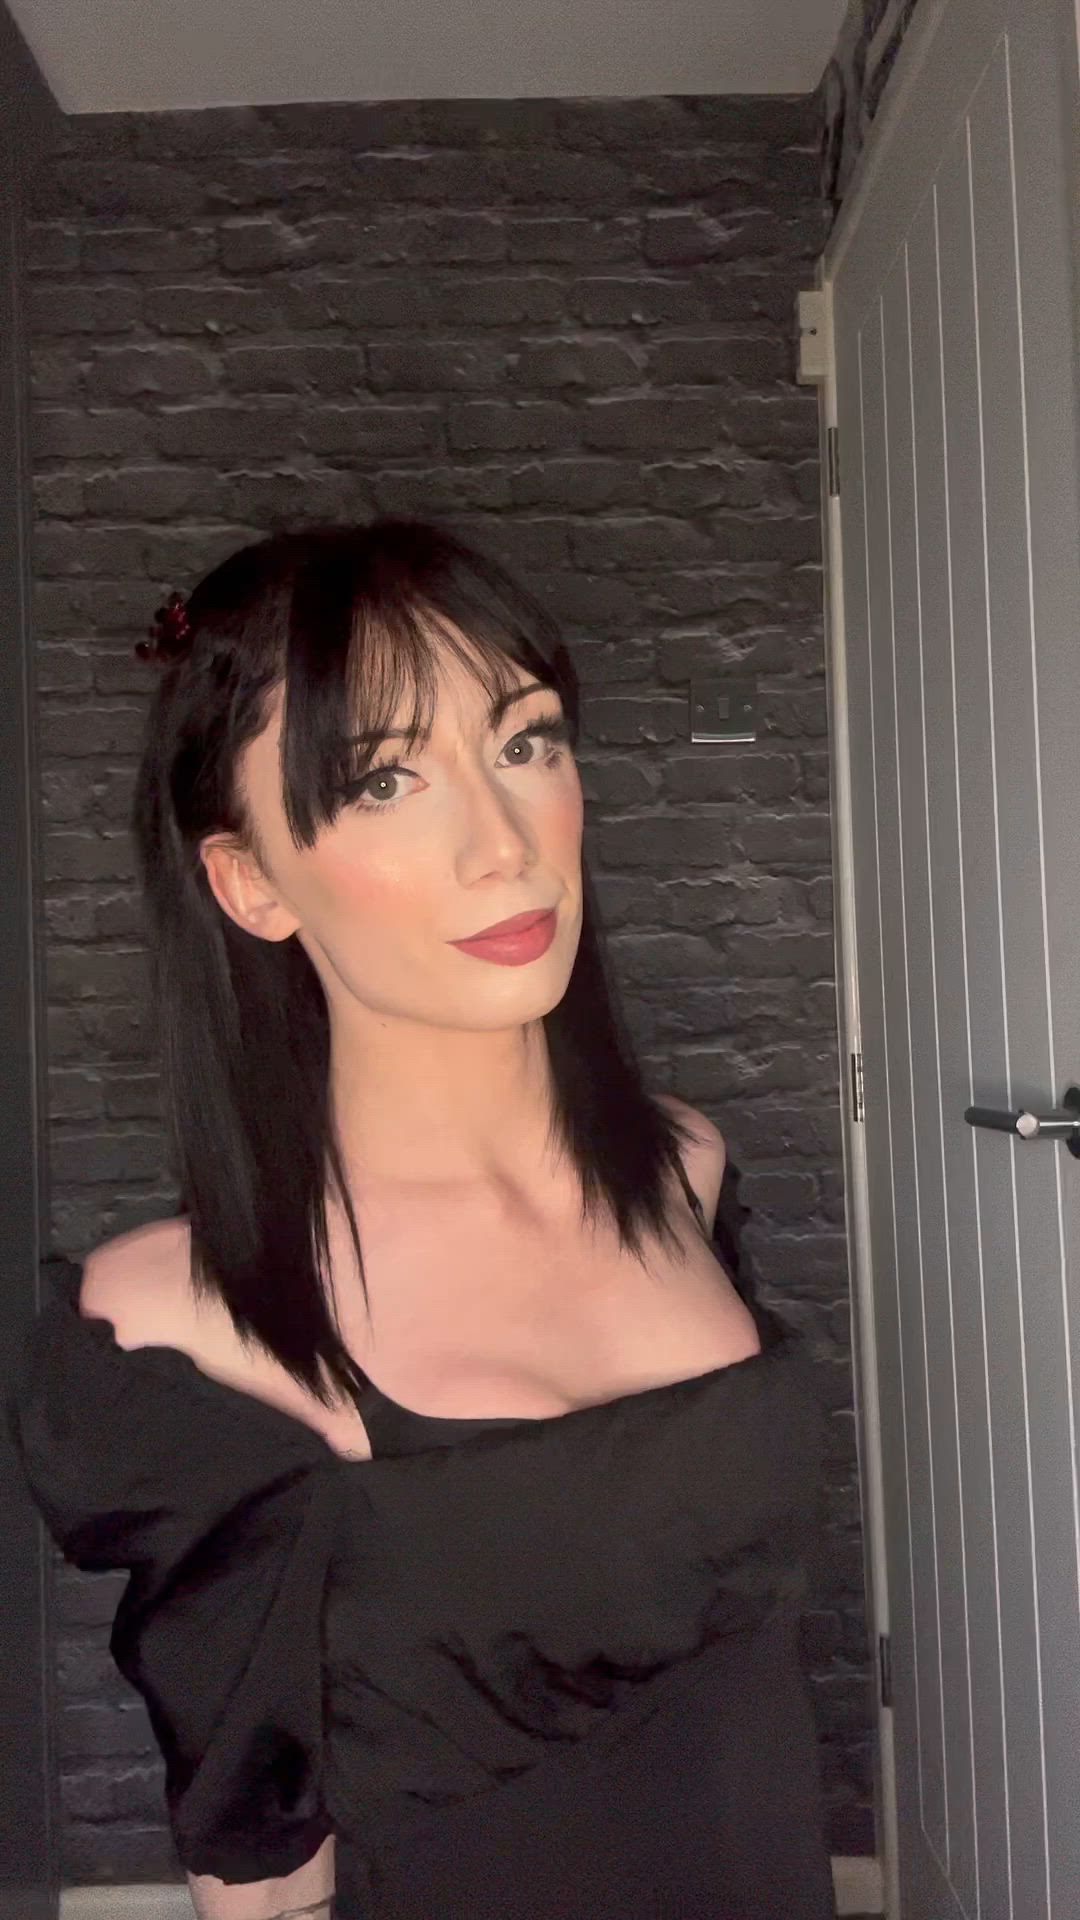 Tits porn video with onlyfans model laylamillerxx <strong>@laylamillerxx</strong>